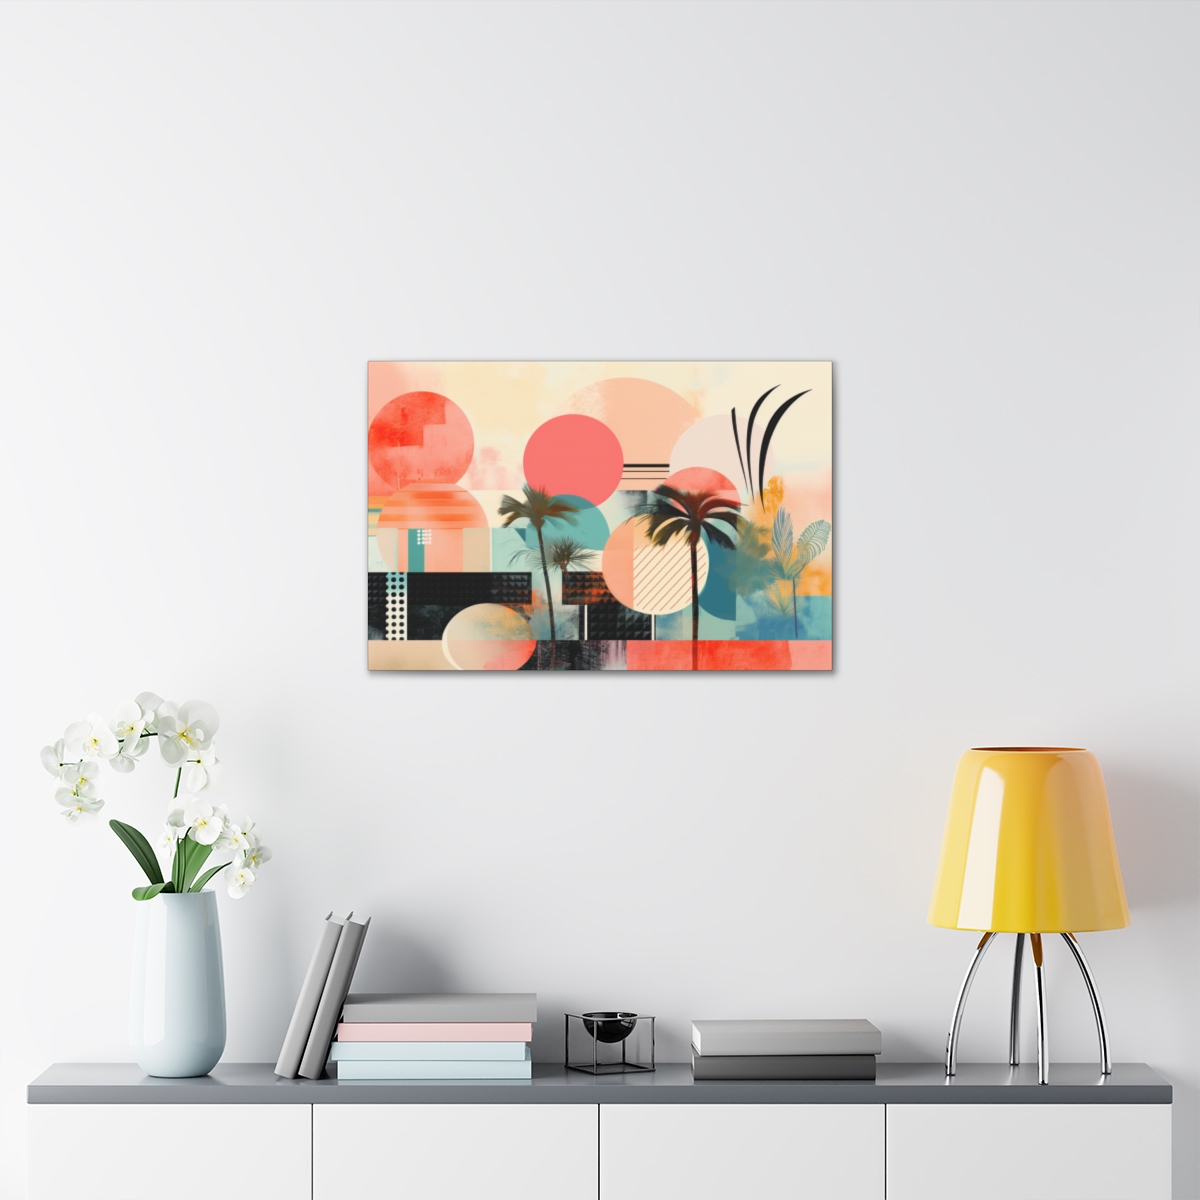 Surreal Wall Art: Tropical Wildness